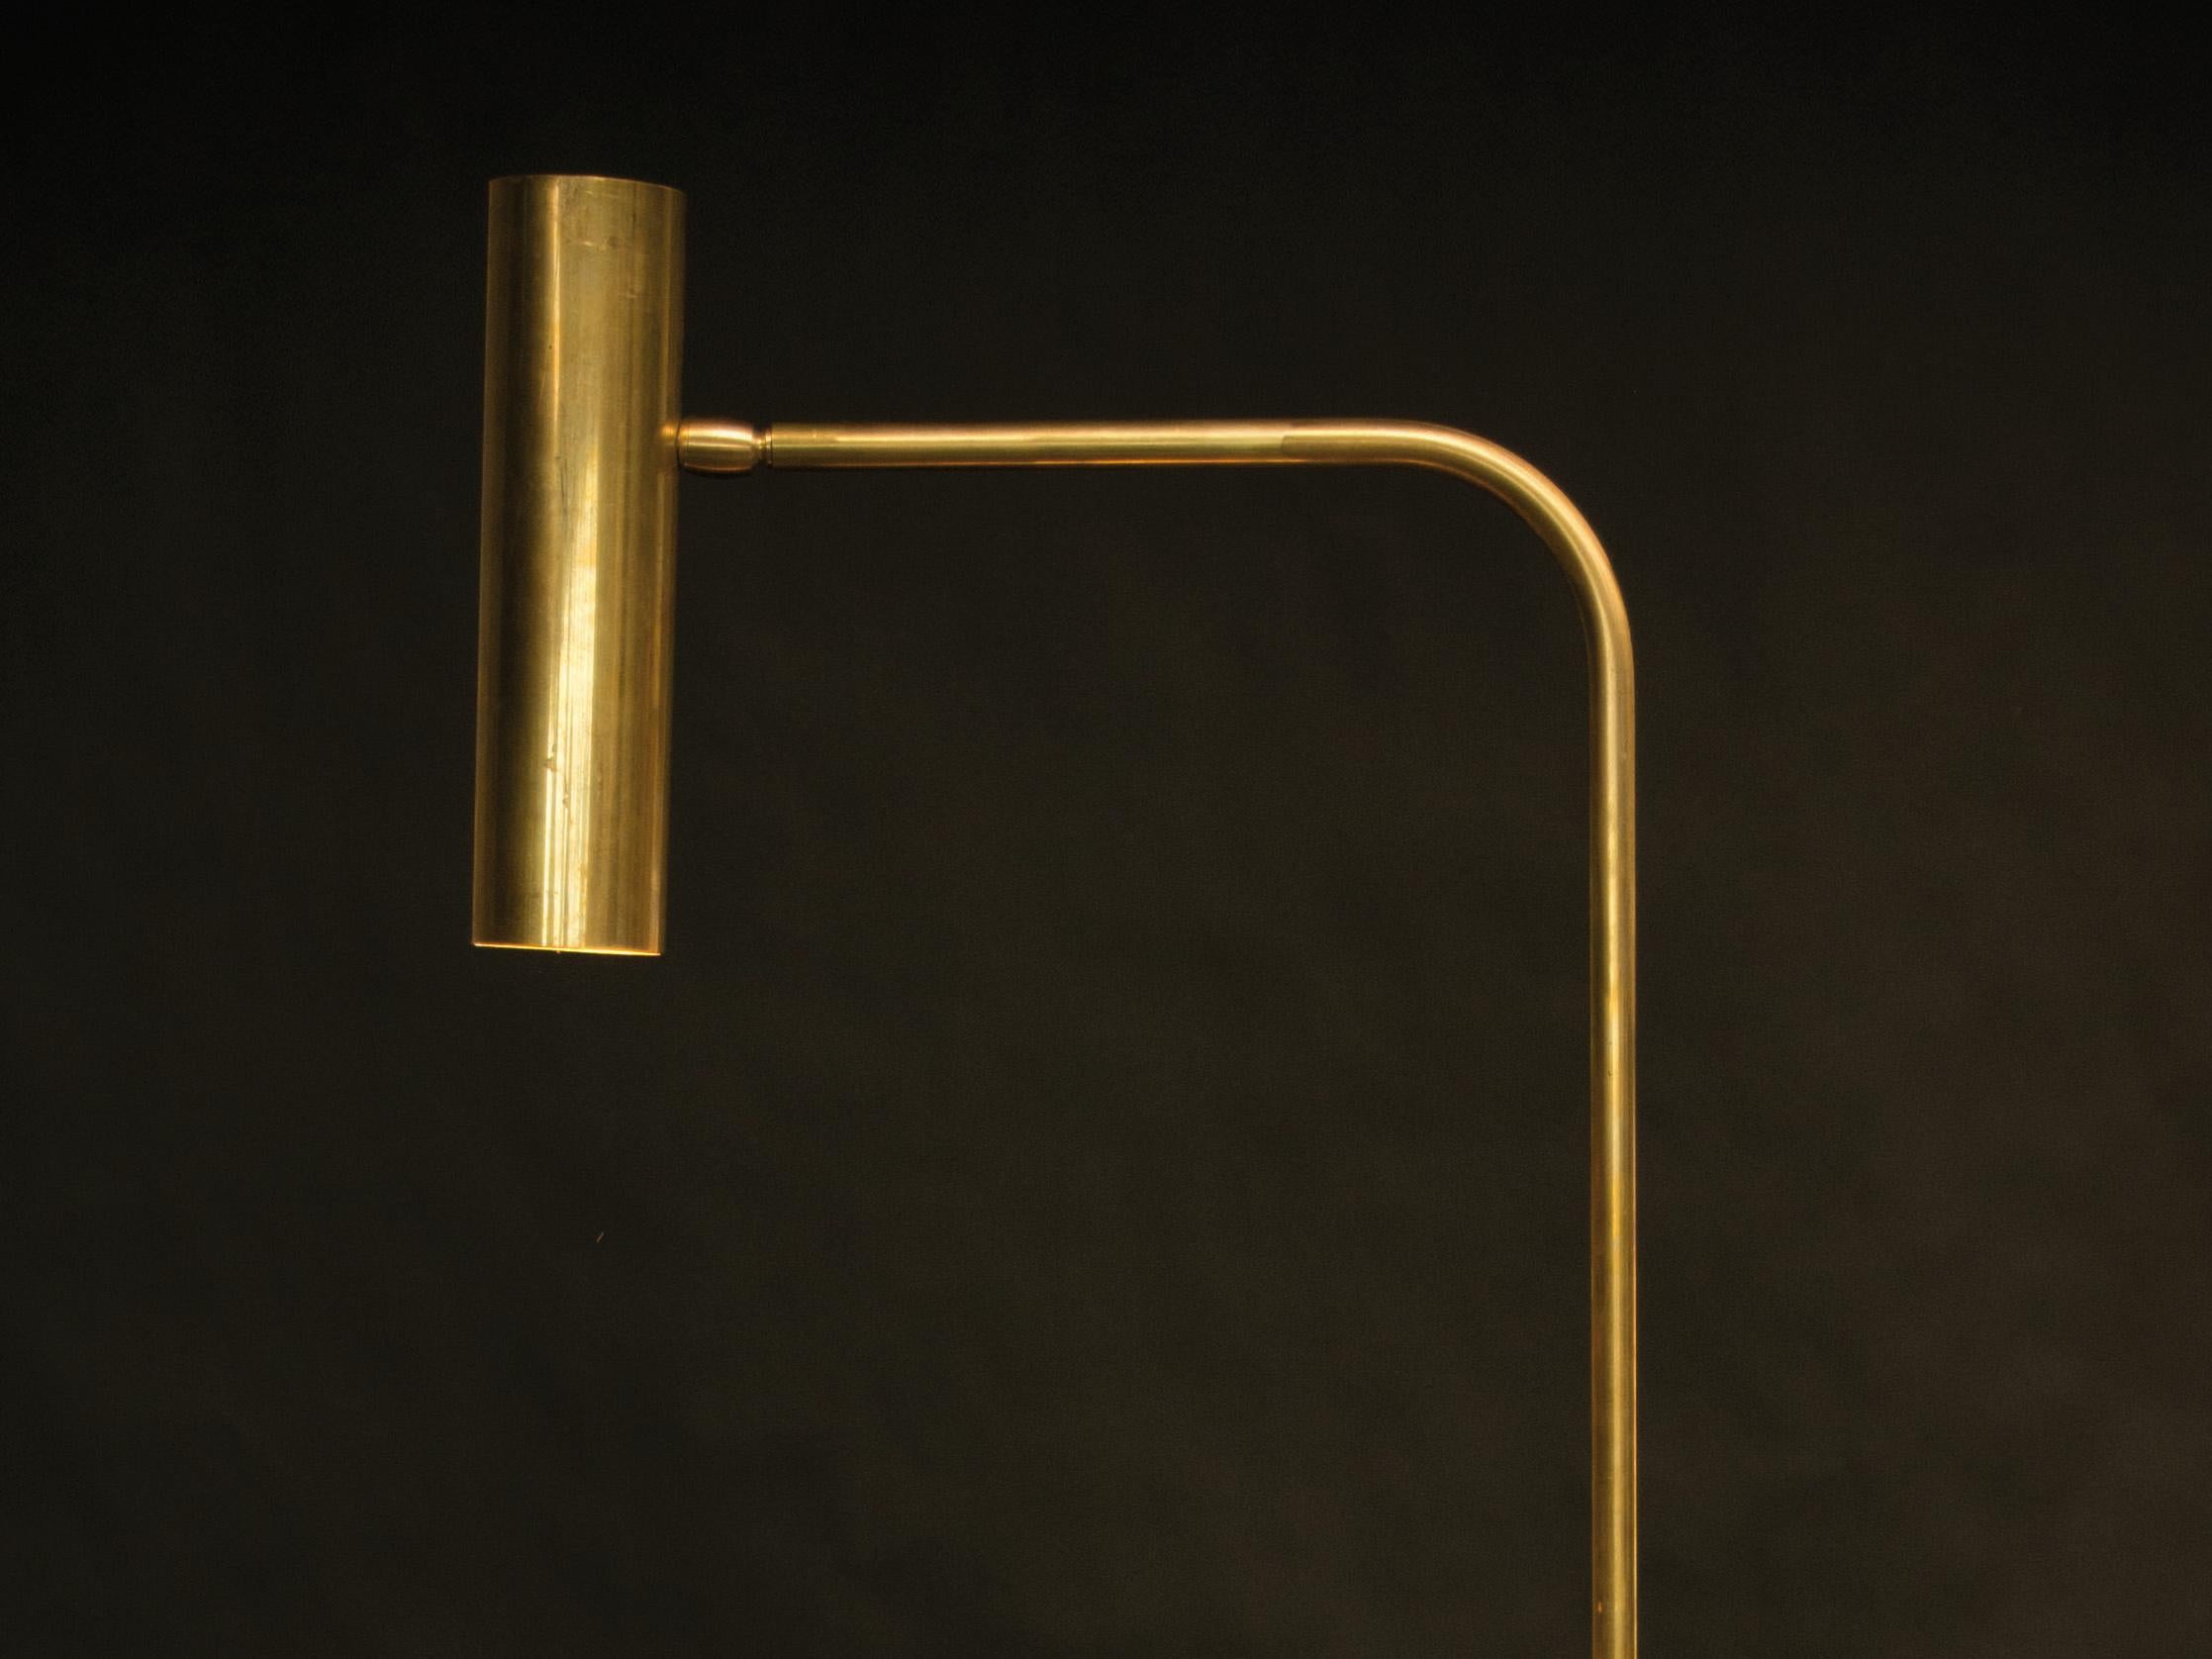 Italian Natural Brass Contemporary-Modern Floor Lamp Handcrafted in Italy by 247lab For Sale